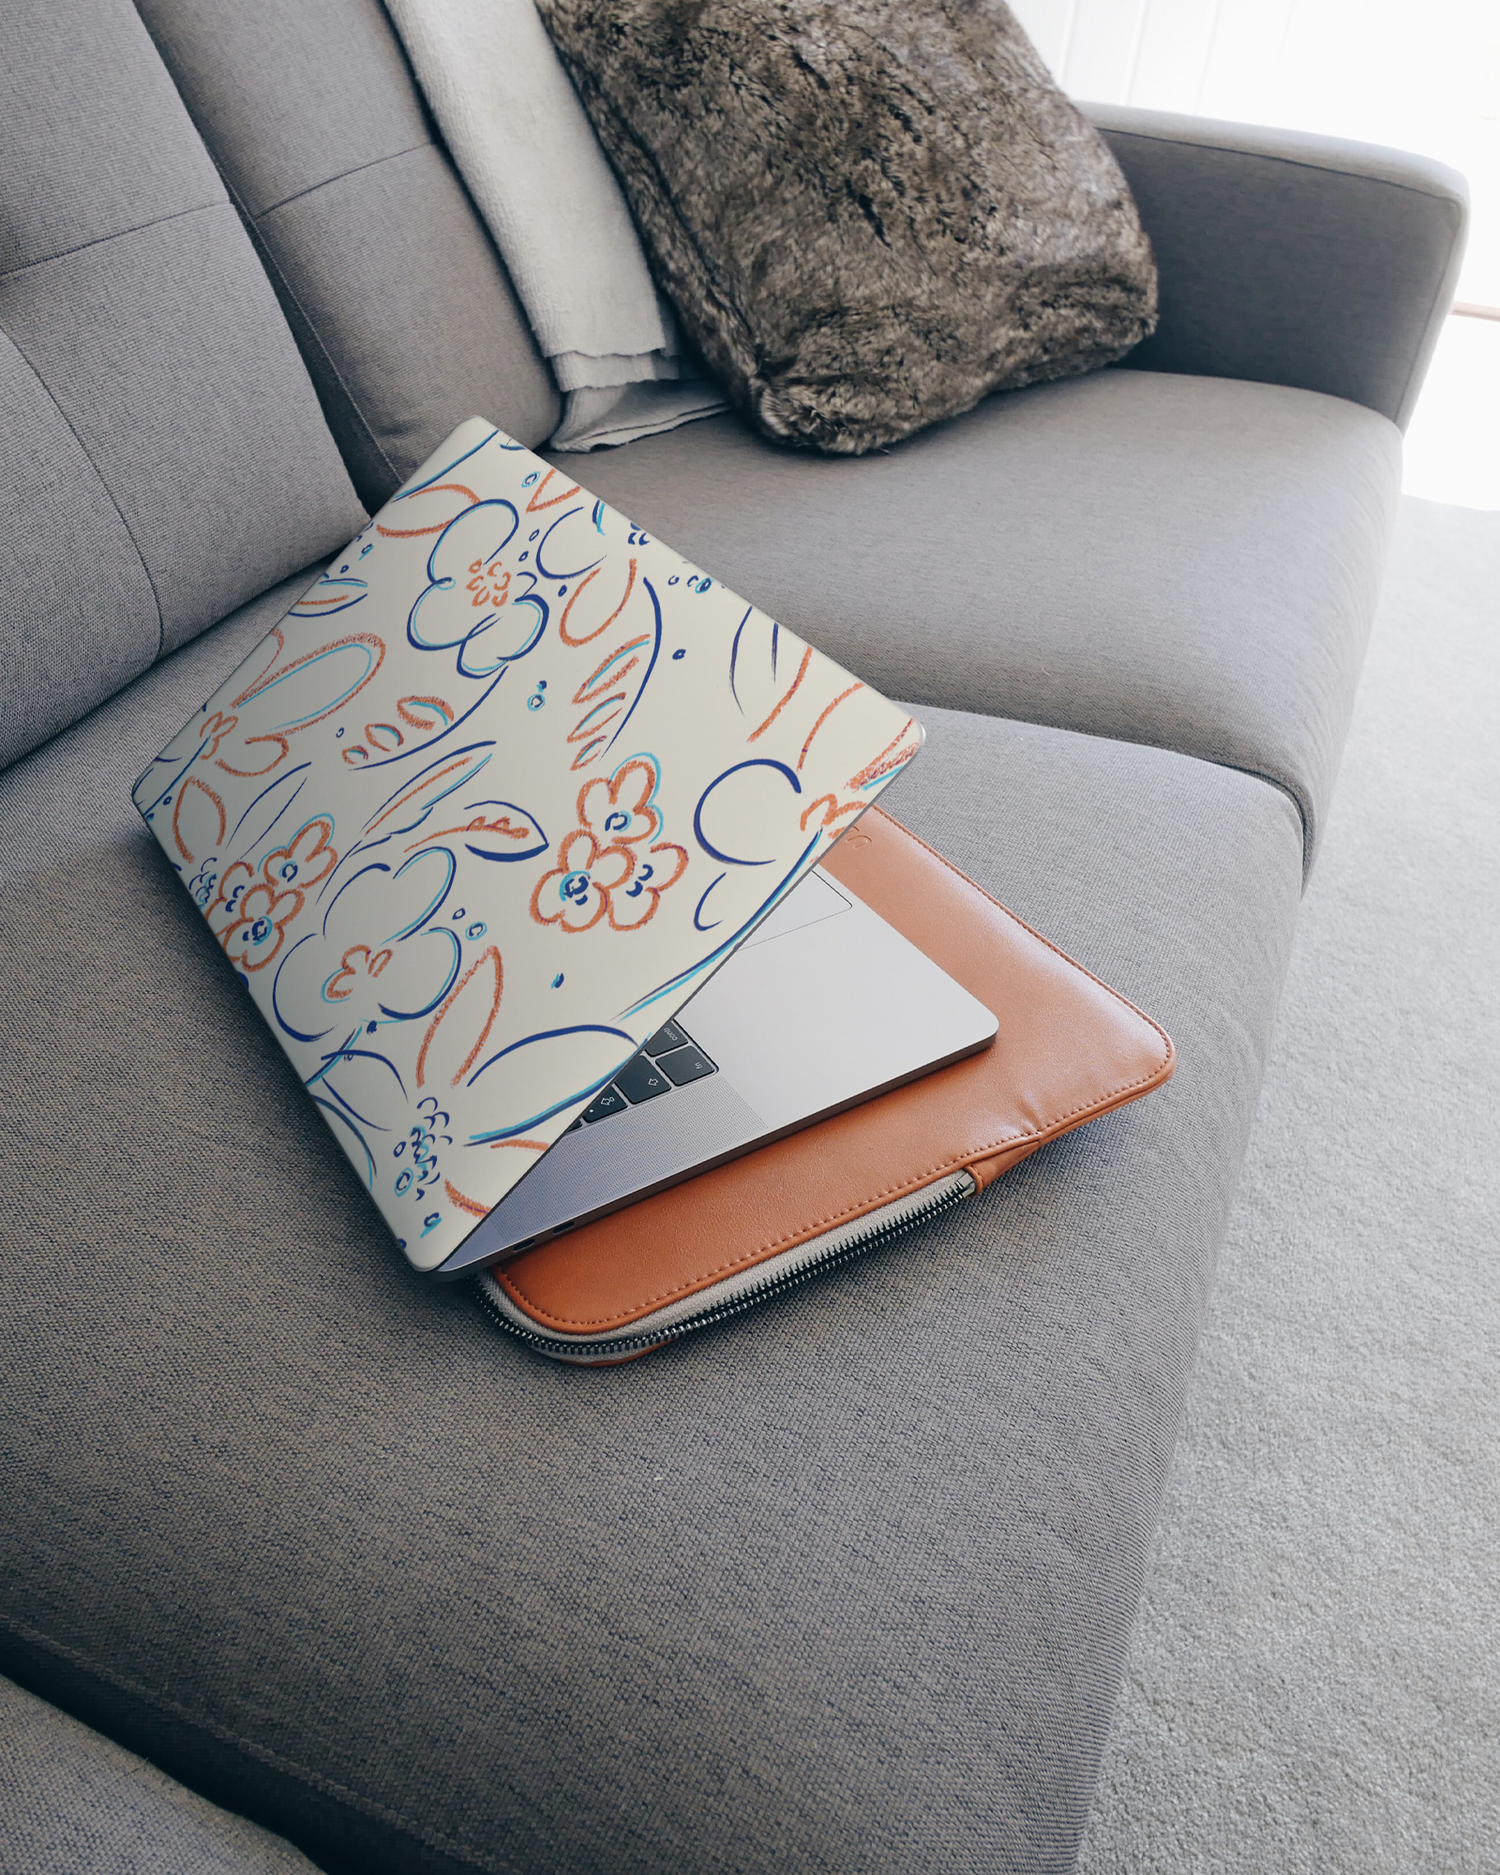 Bloom Doodles Laptop Skin for 15 inch Apple MacBooks on a couch